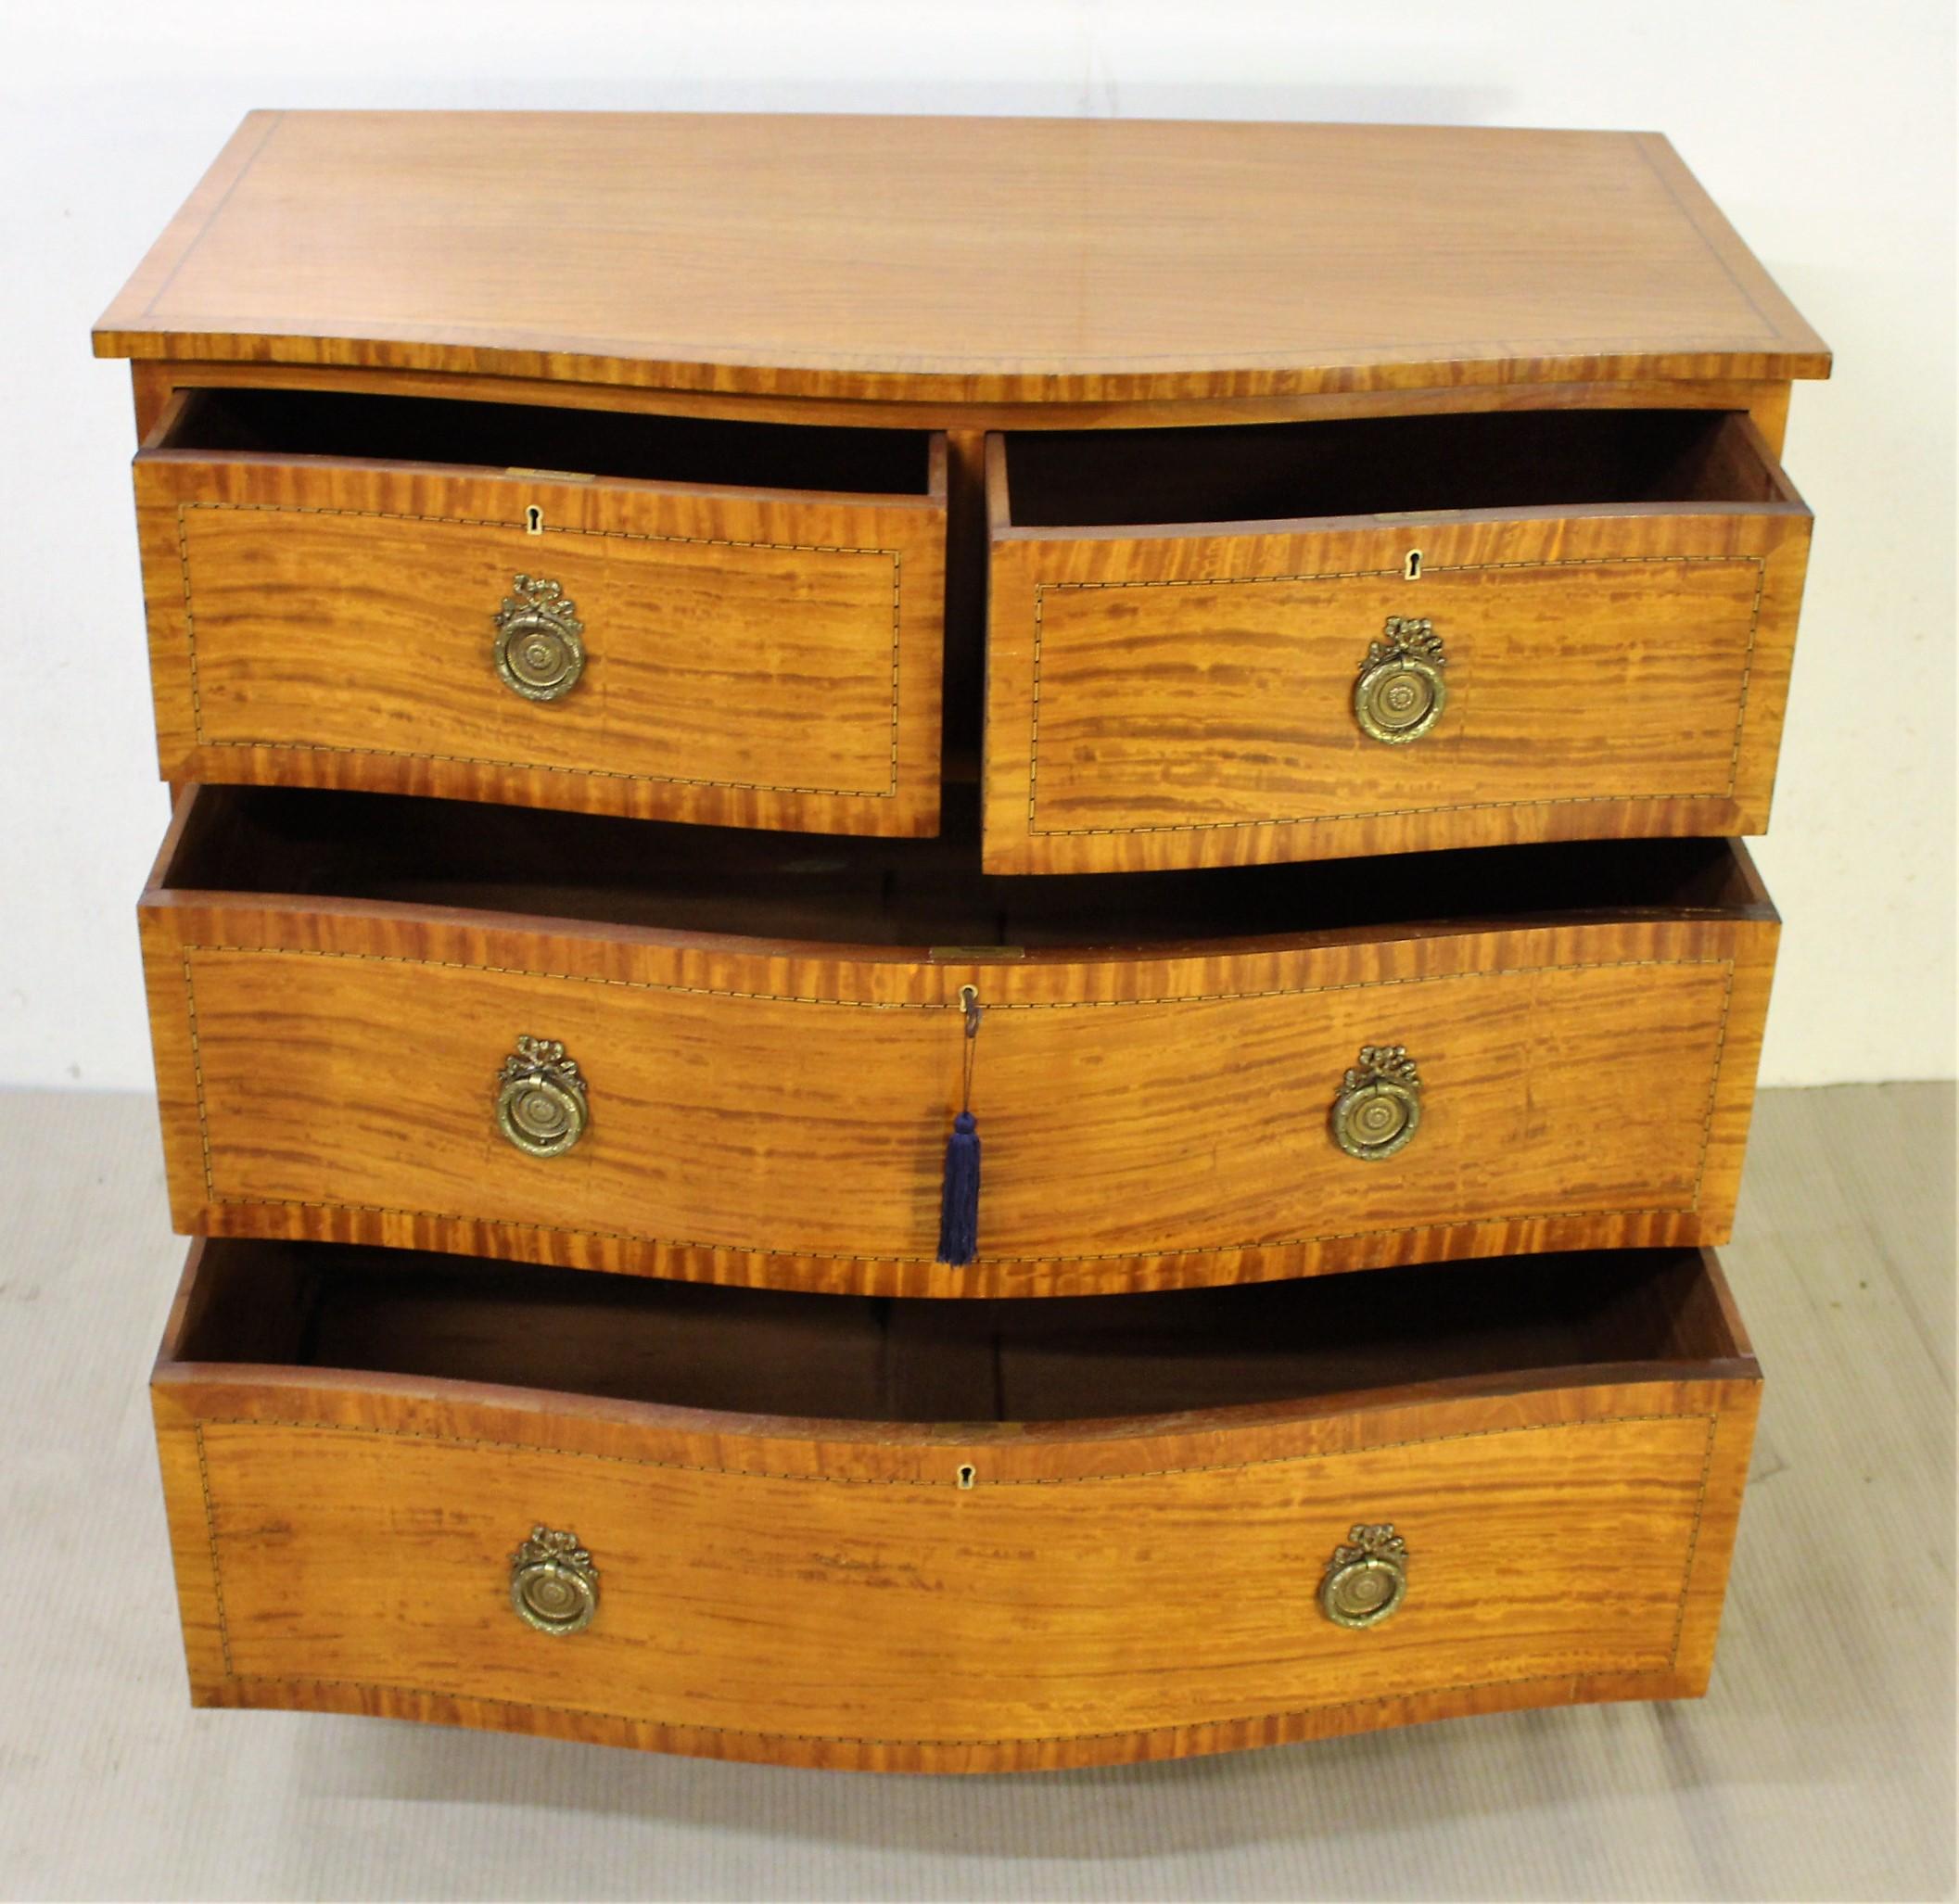 English Edwardian Period Inlaid Satinwood Serpentine Fronted Chest of Drawers 4